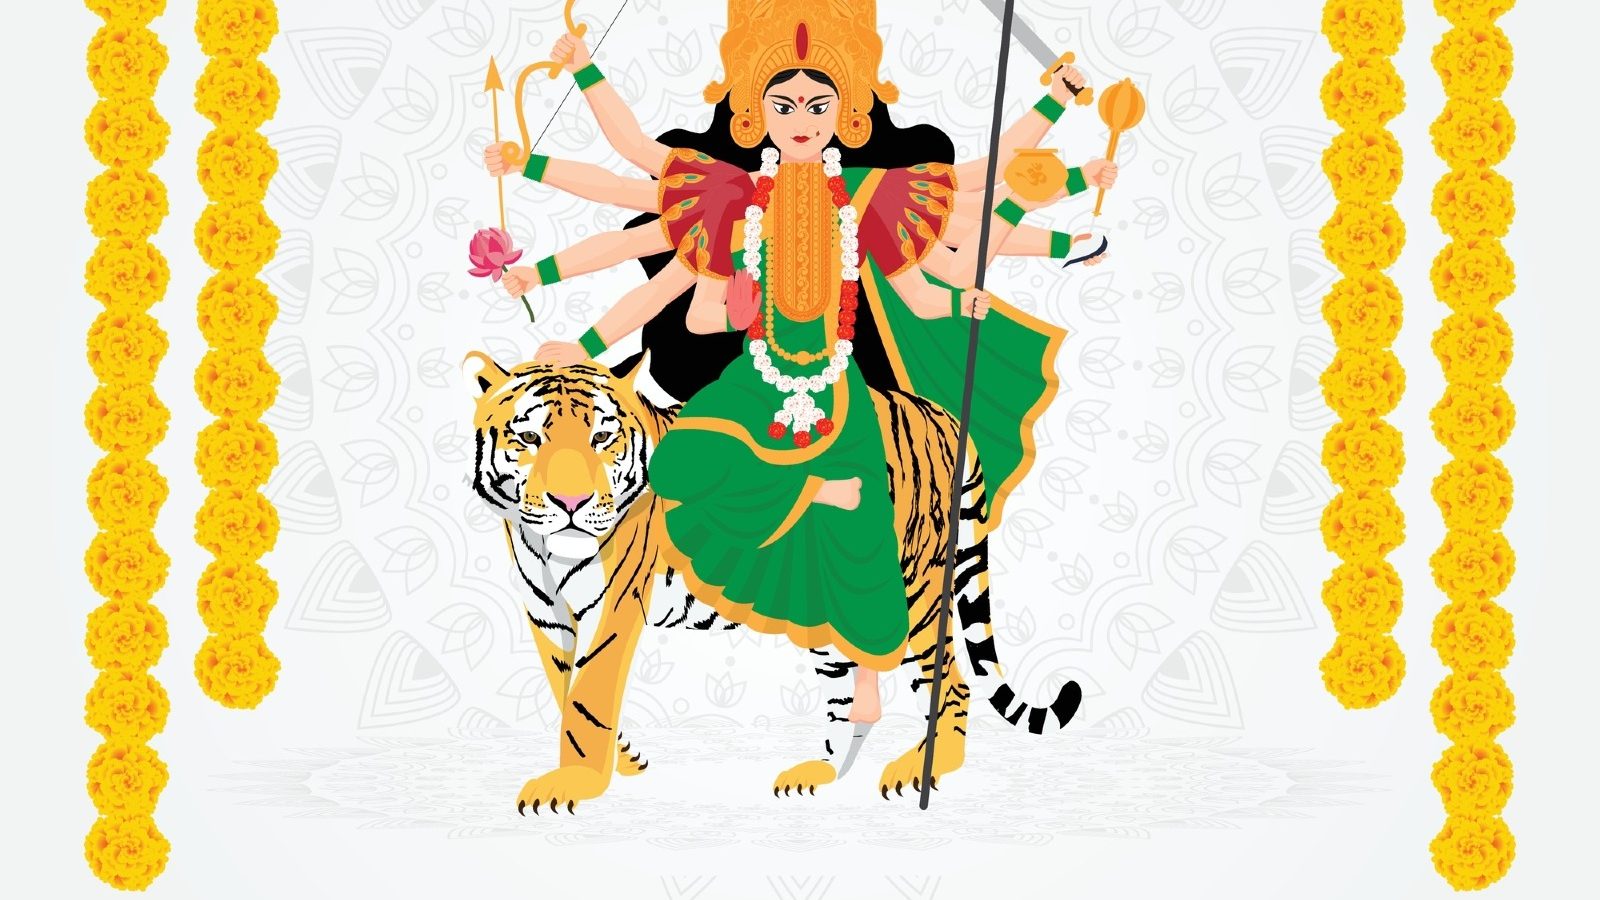 Why do we worship Goddess Durga with so many arms and weapons in her hand?  - Quora